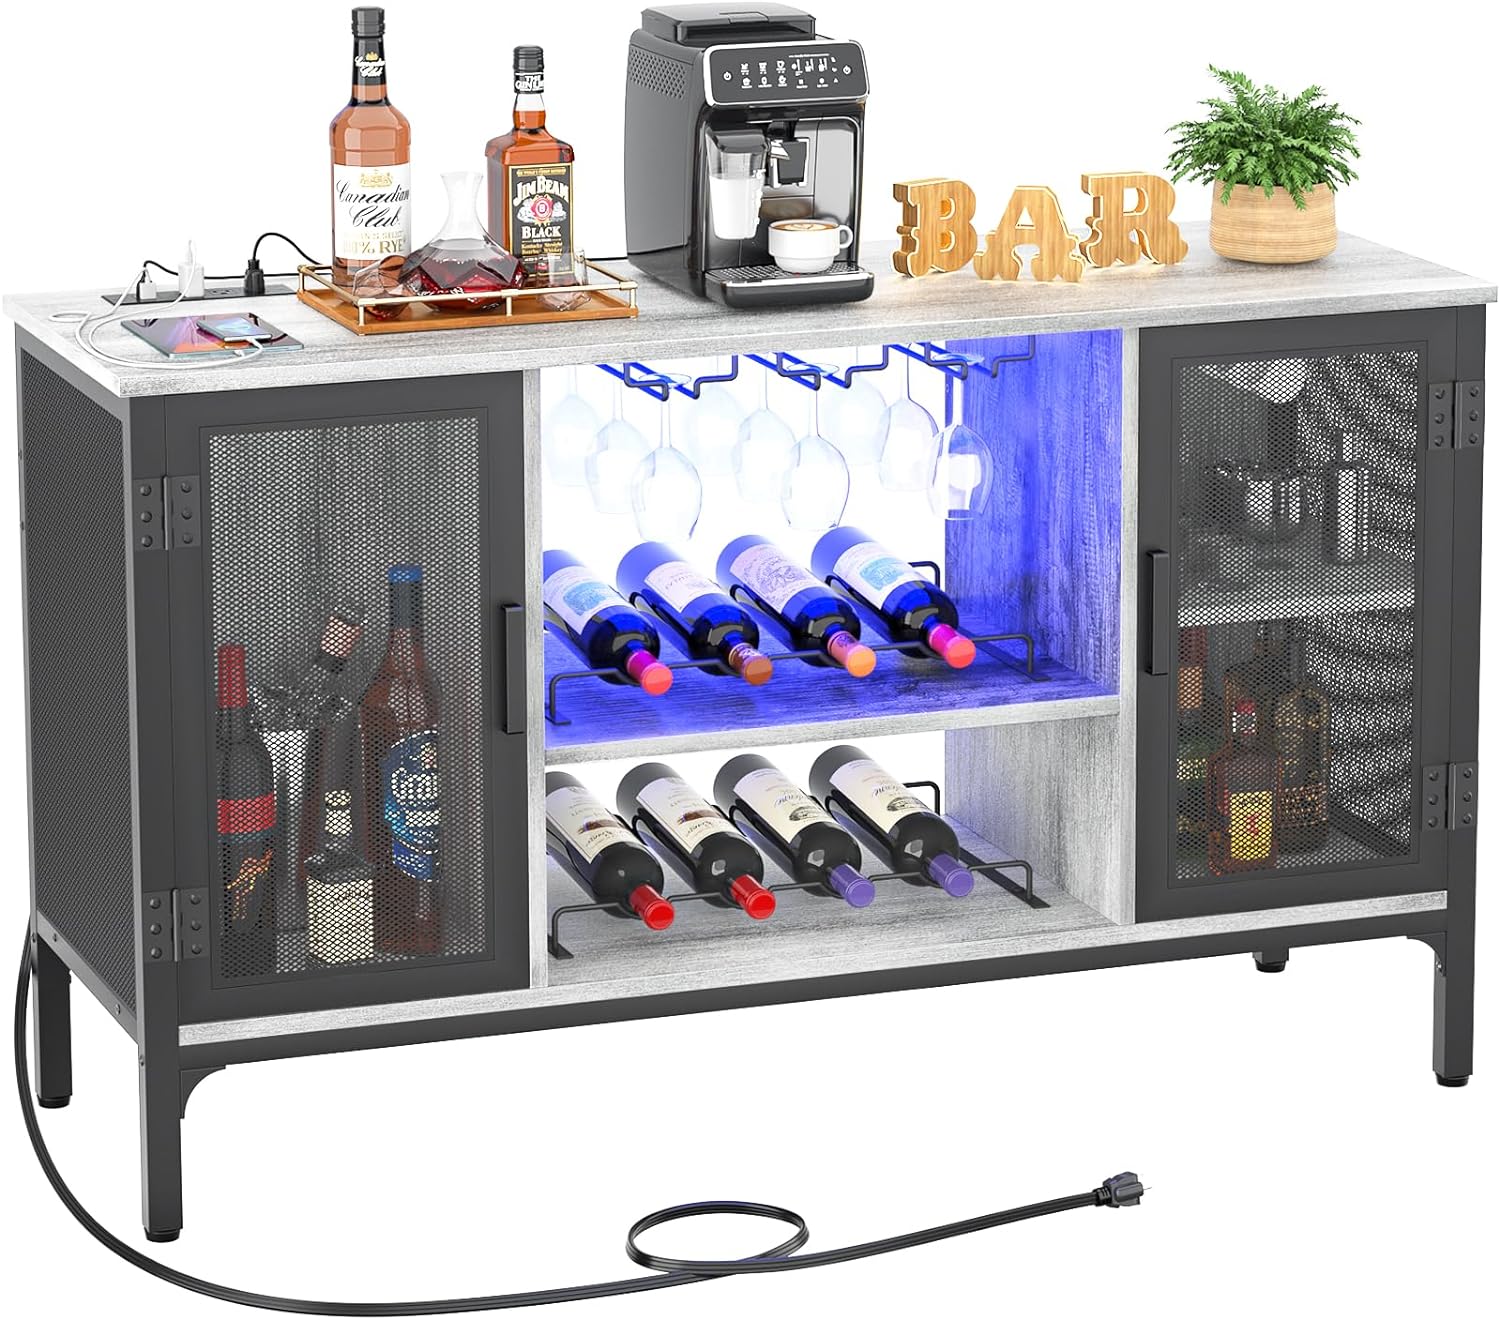 Homieasy Wine Bar Cabinet with Led Lights and Power Outlets, Industrial Coffee Bar Cabinet for Liquor and Glasses, Farmhouse Bar Cabinet with Removable Wine Racks, Light Oak